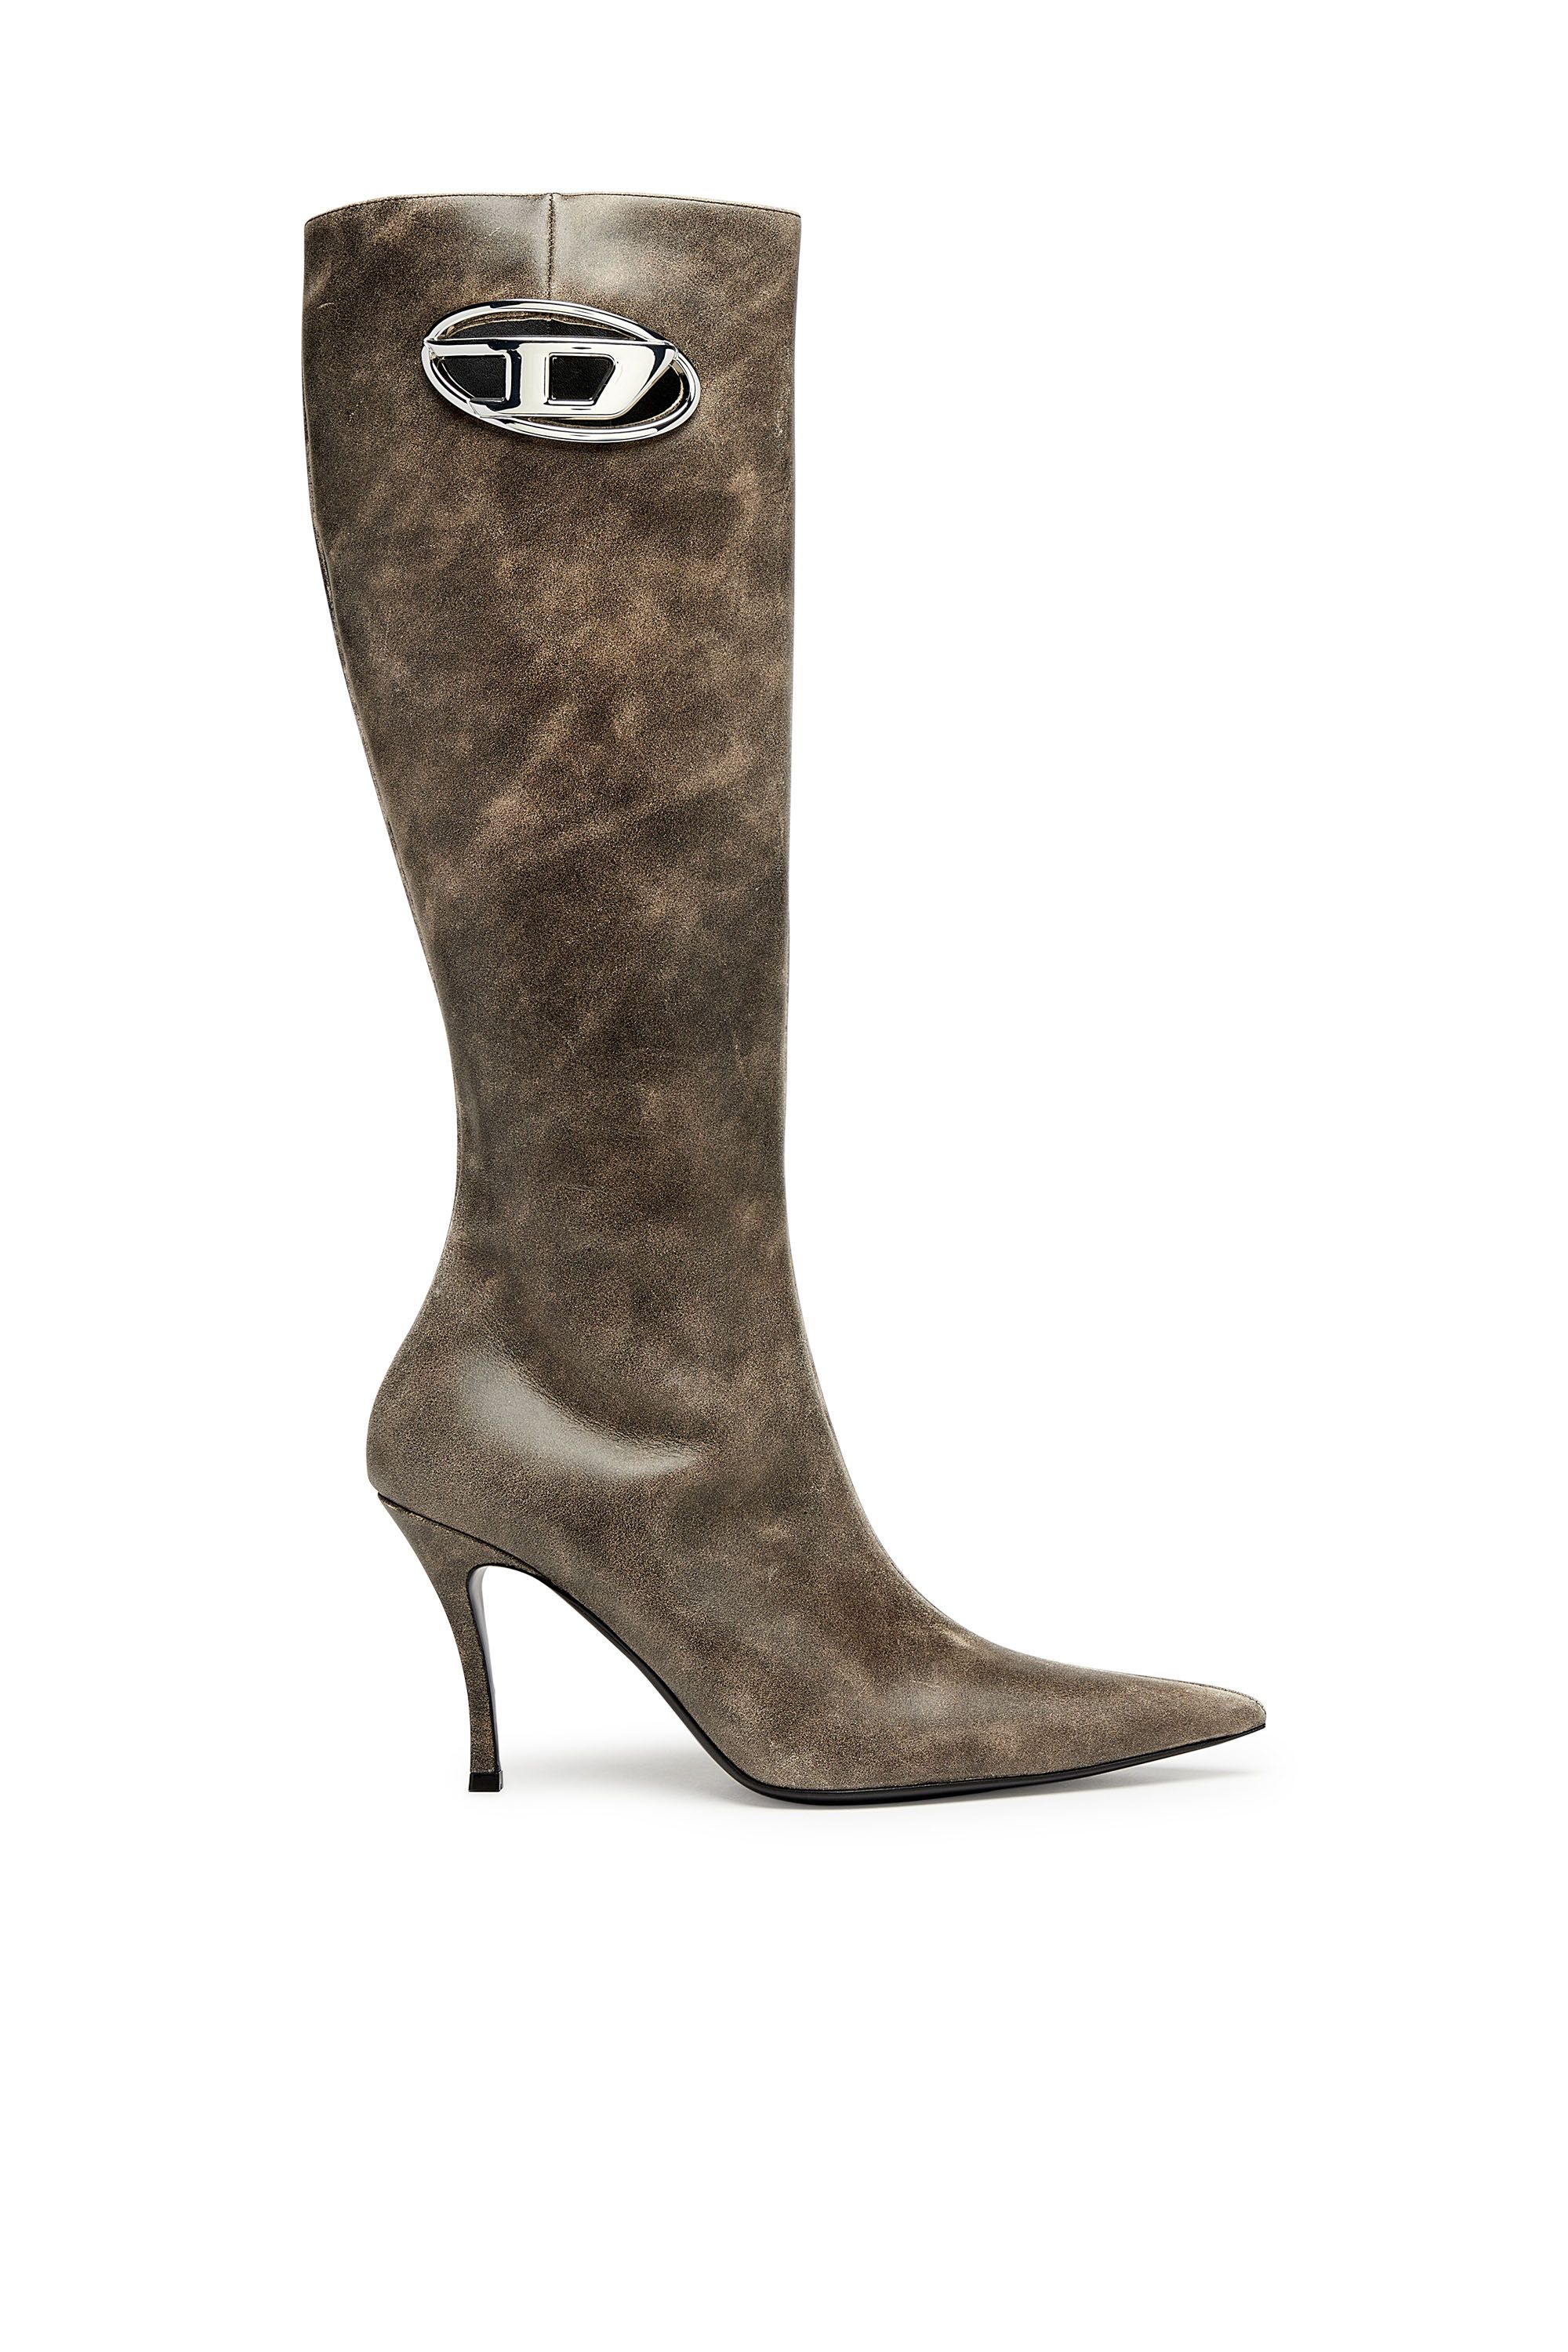 D-Venus HBT - Treated leather boots with oval D plaque | Diesel US